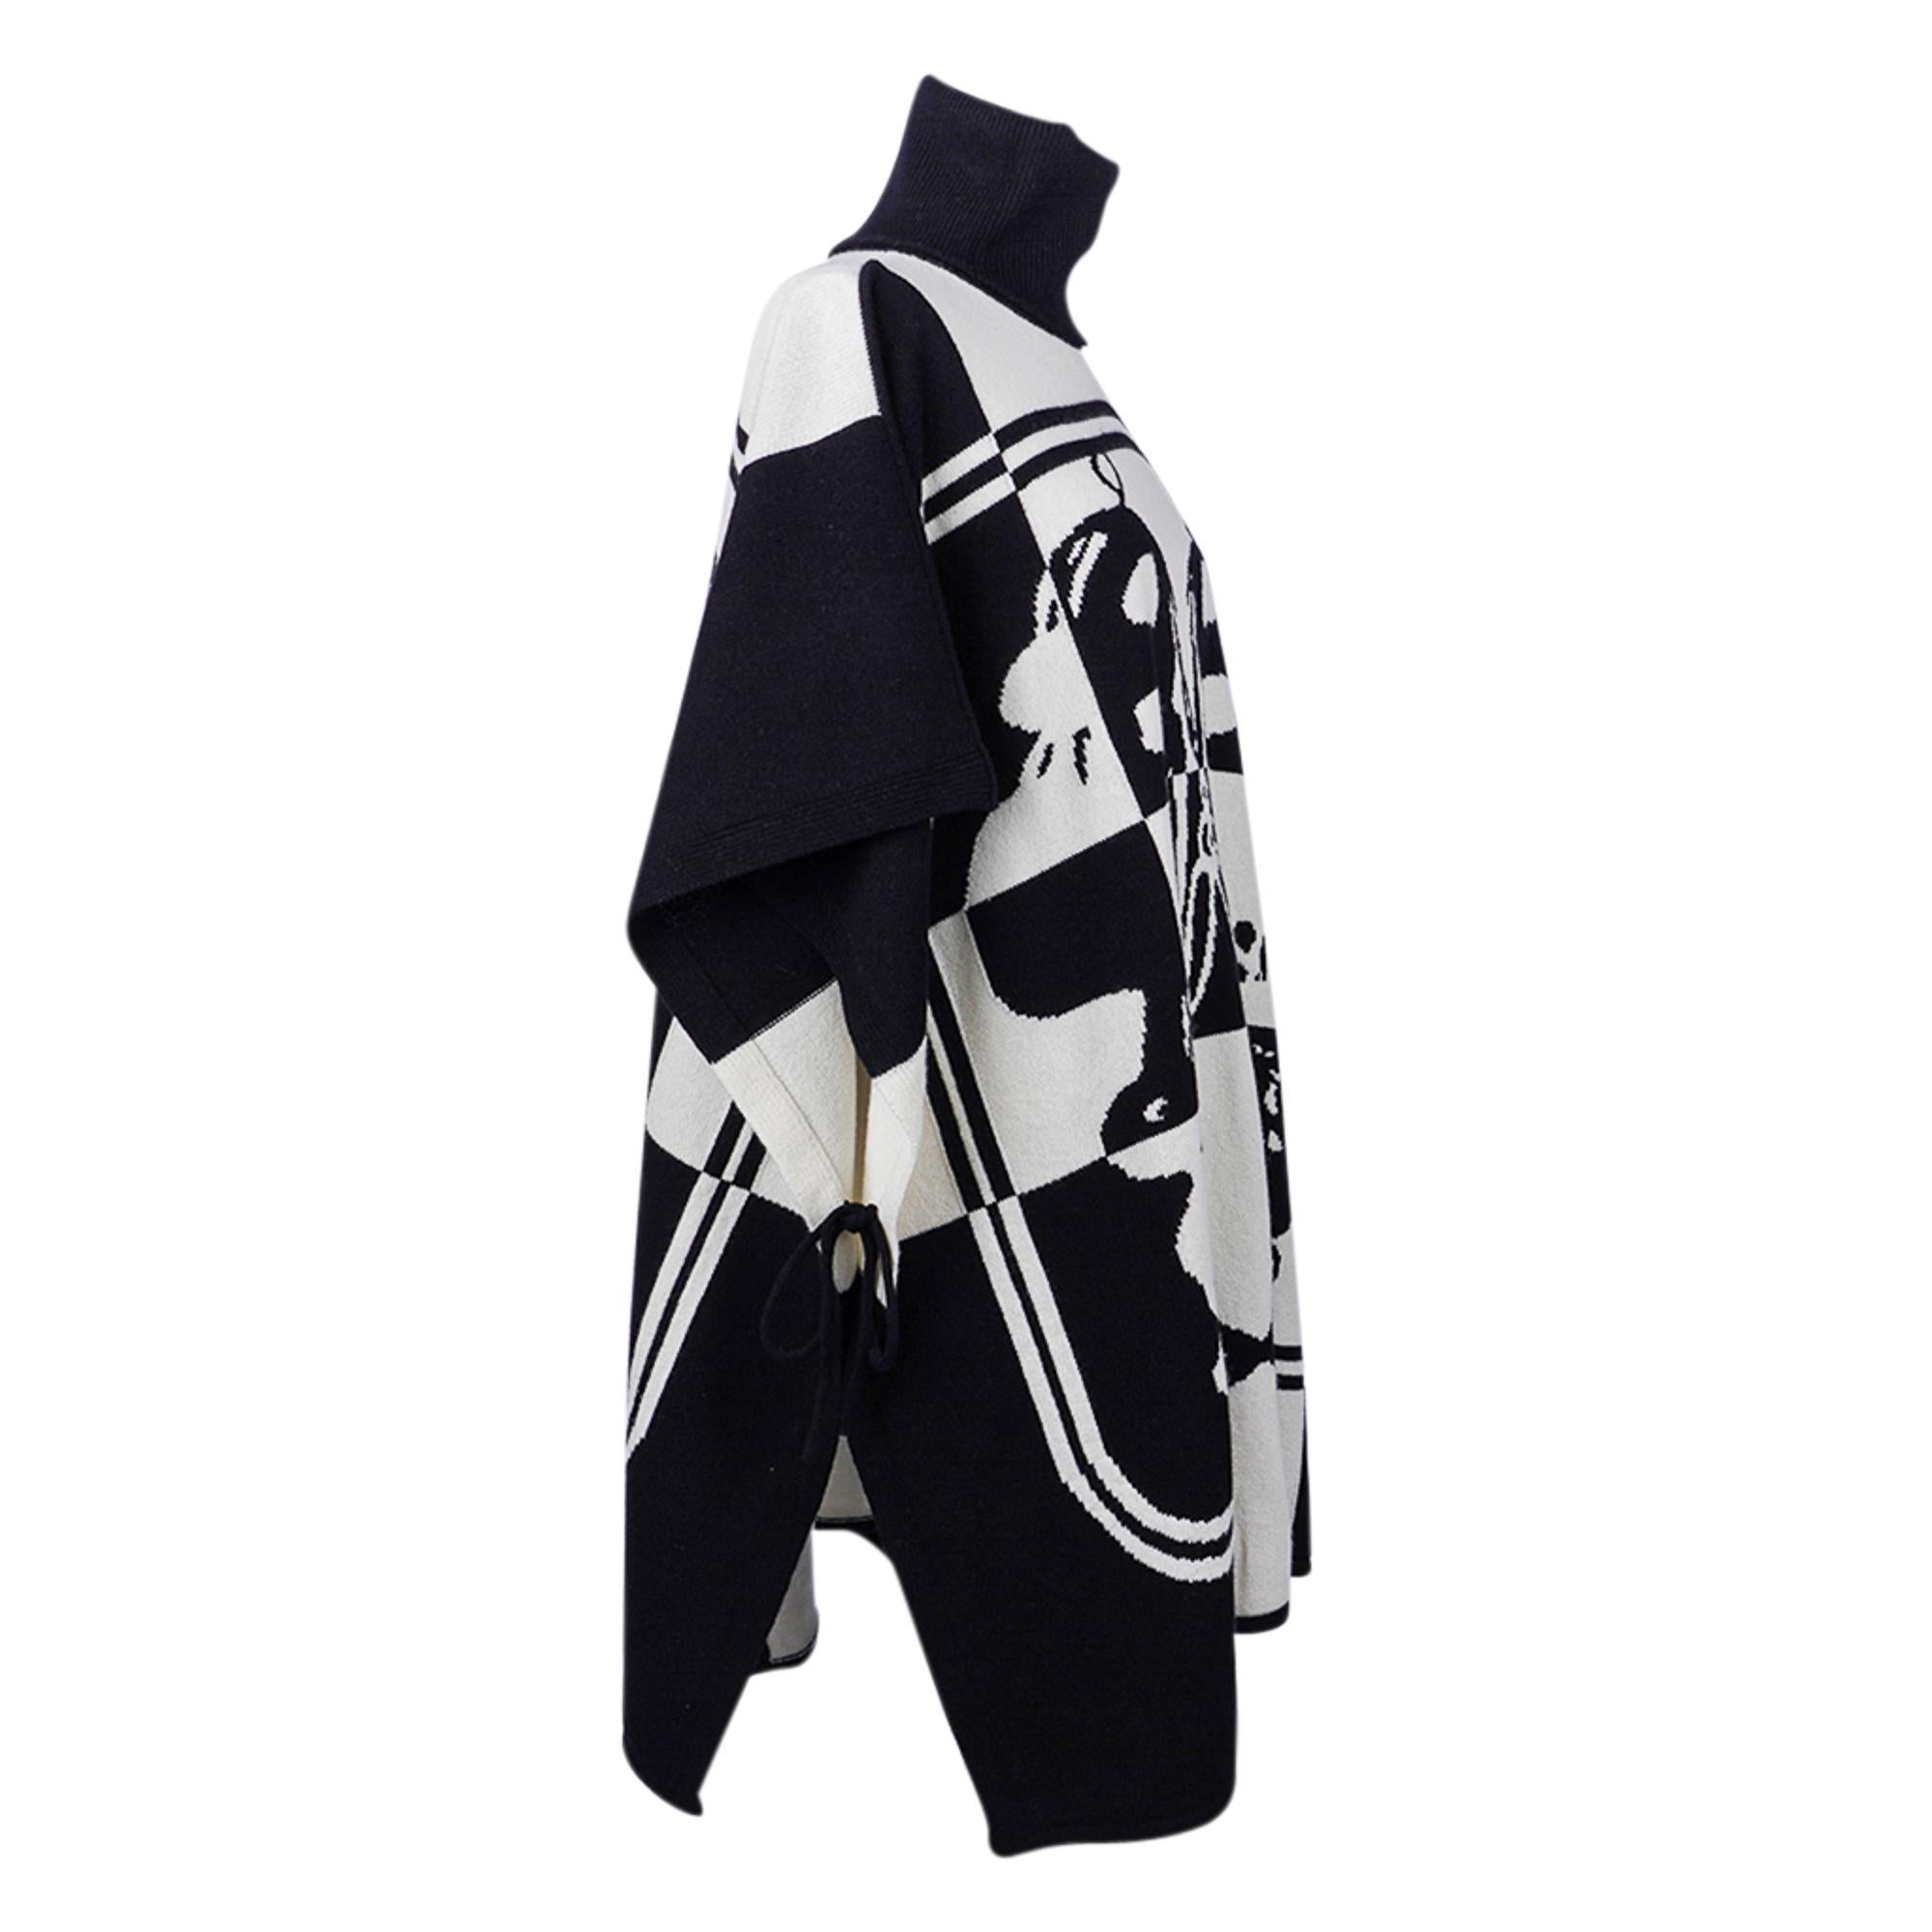 Mightychic offers an Hermes Poncho Brides de Gala Sweater White / Black Cashmere